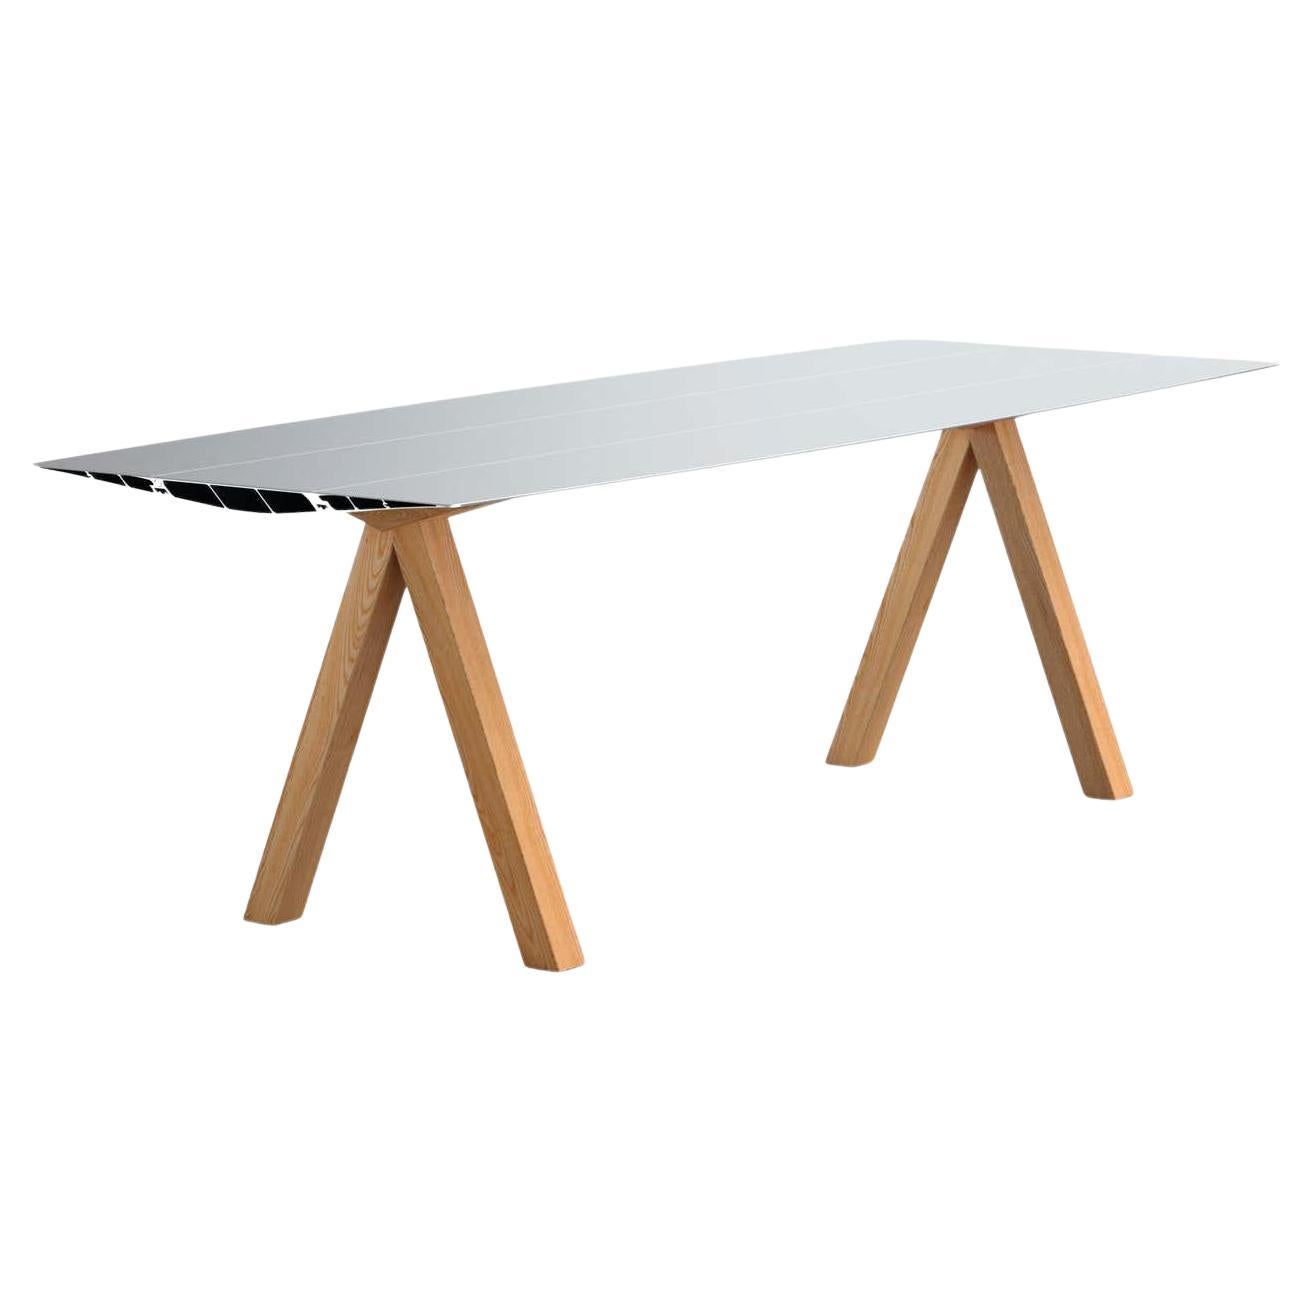 Dinning Table B Aluminum Anodized Silver Top Wooden Legs For Sale